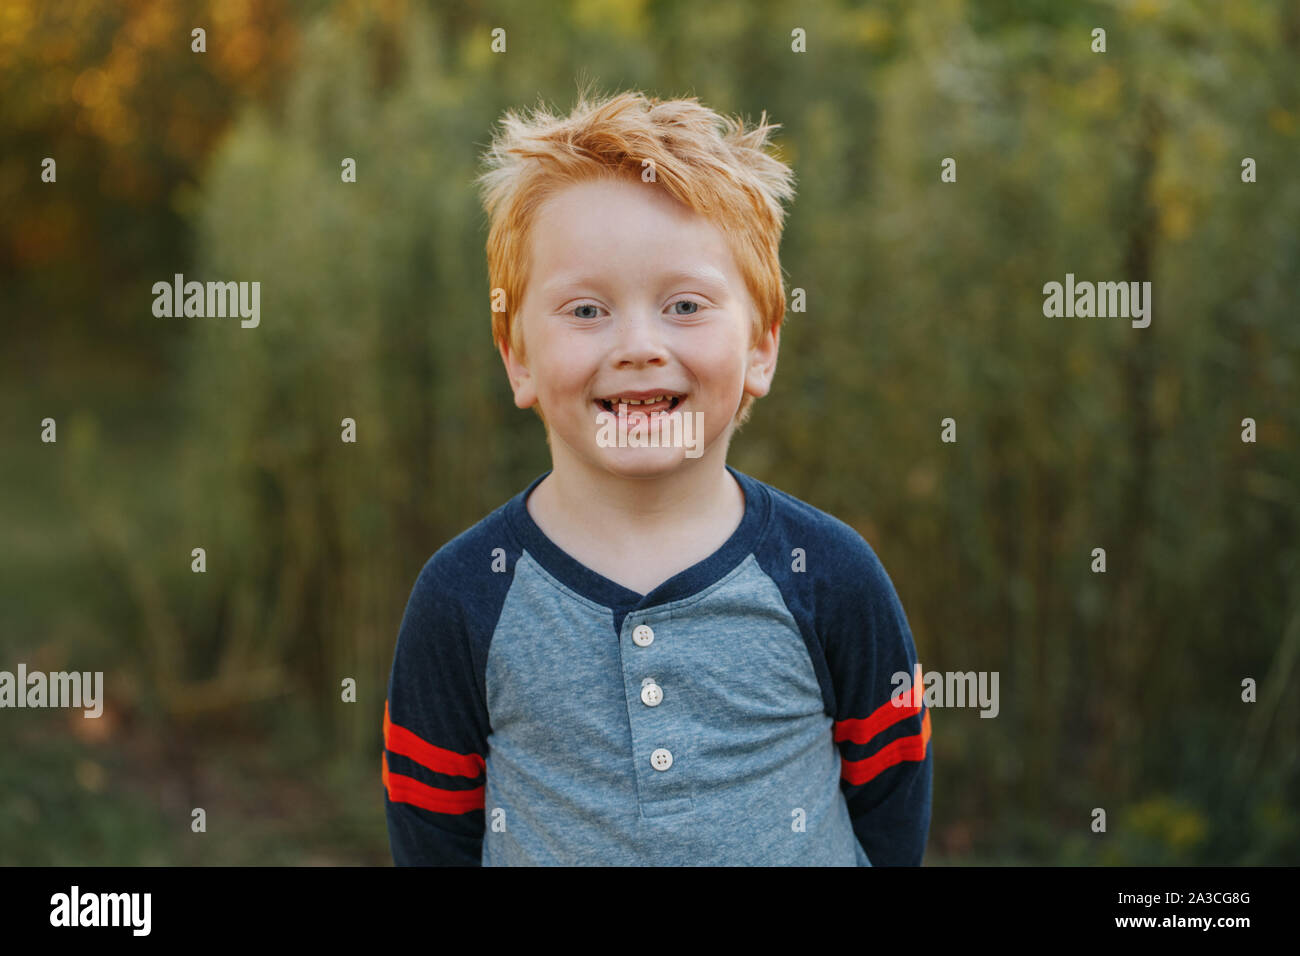 Closeup portrait of Caucasian red-haired cute handsome preschool boy. Adorable child standing outside on autumn fall day. Happy smiling kid outdoor. A Stock Photo